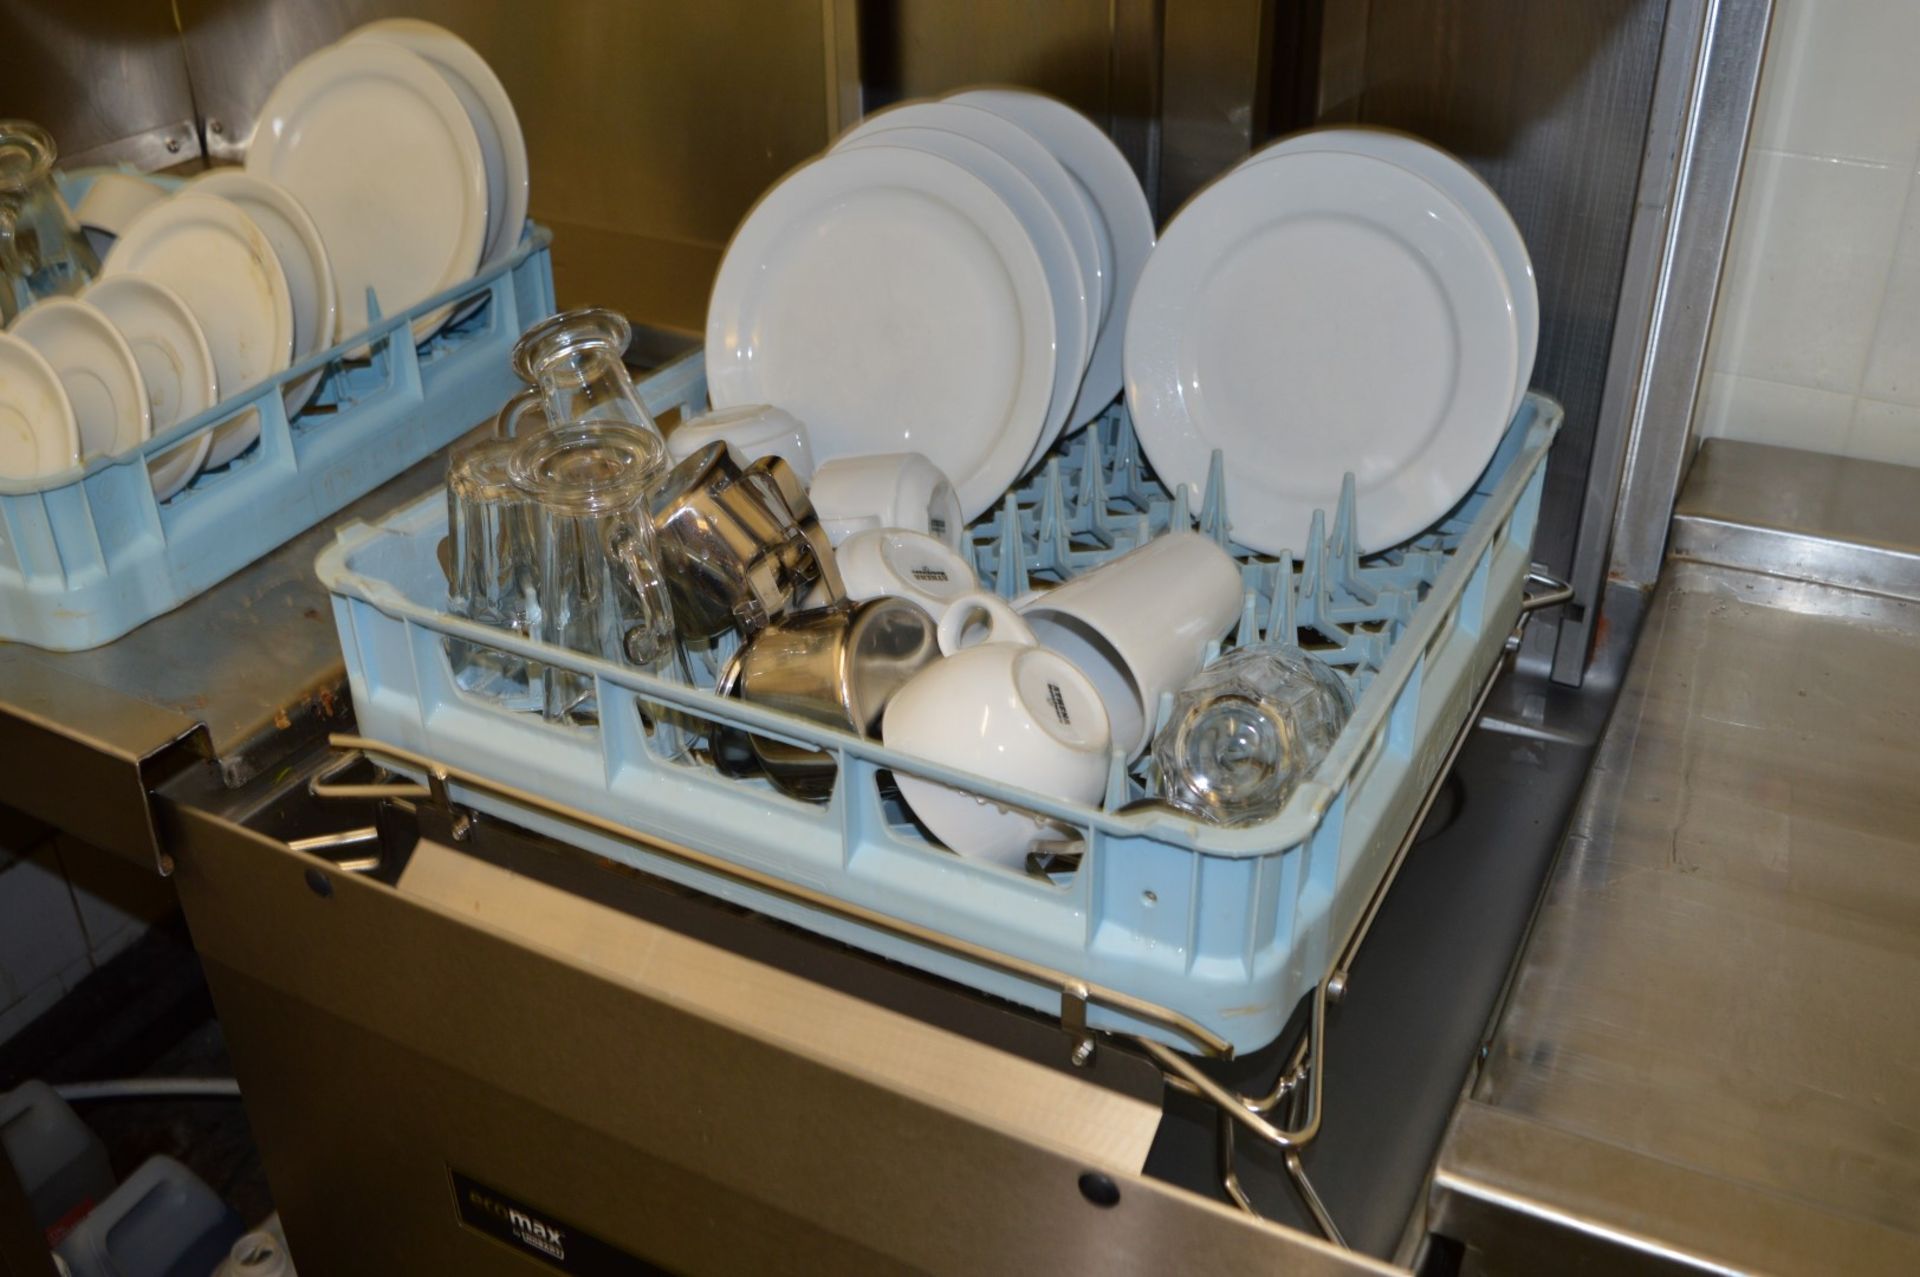 1 x Hobart Ecomax Pass Through Hood Dishwasher - Model H602S-12A - ONLY 5 MONTHS OLD - Powerful - Image 9 of 11